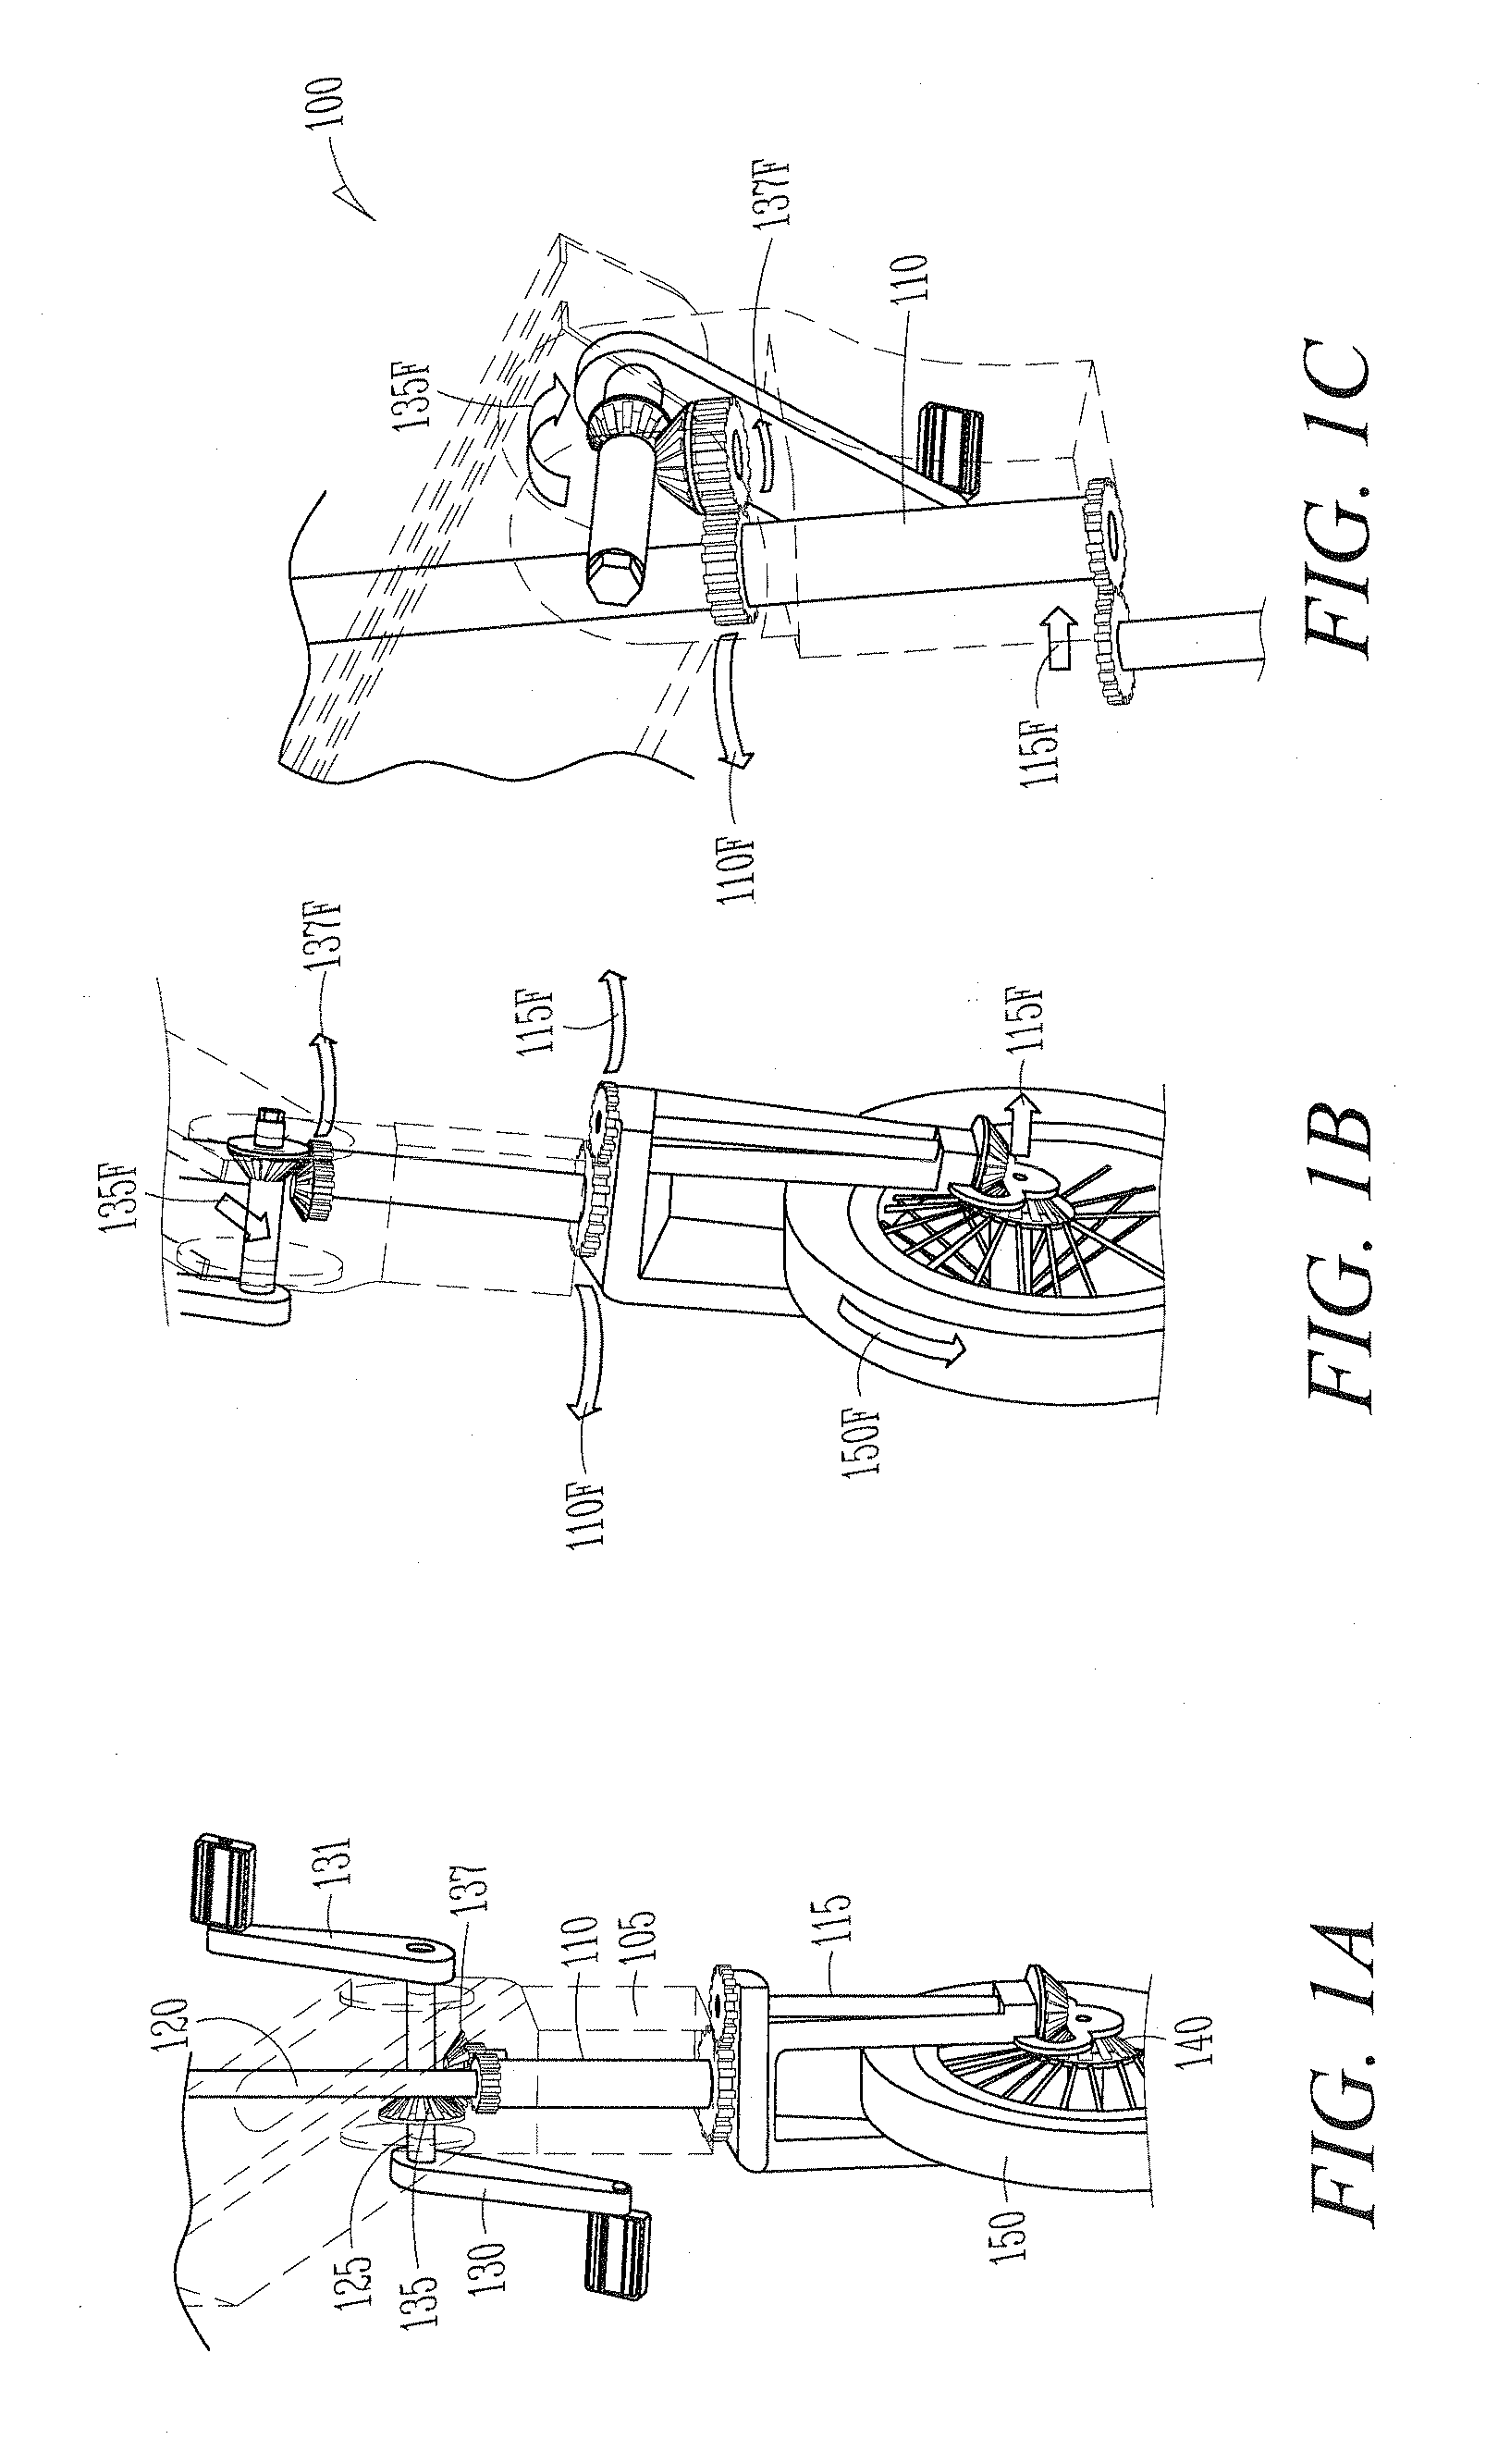 Folding vehicle having a chassis that functions as a protective, carry-on casing